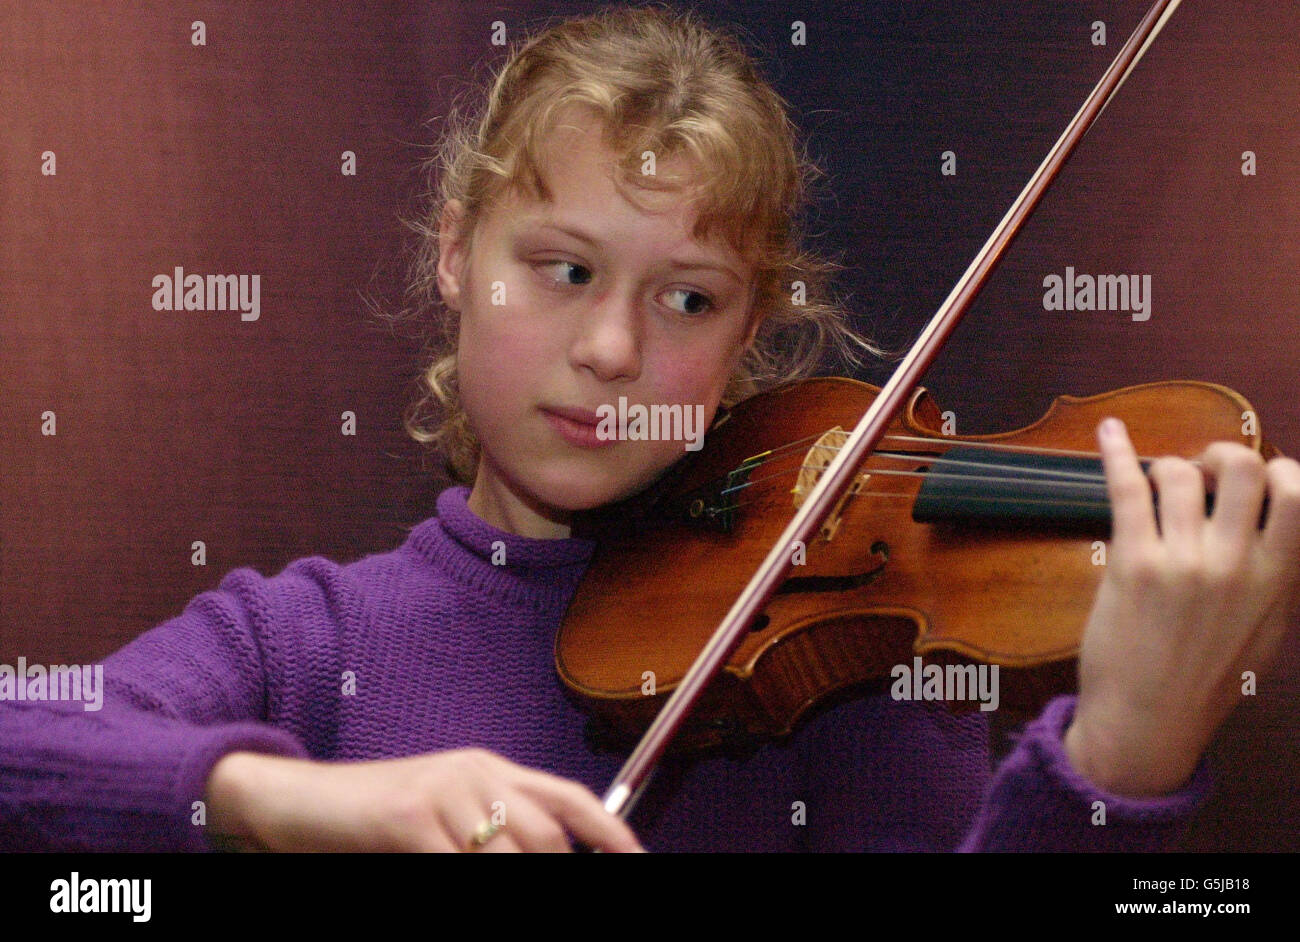 German violin prodigy Maria Elizabeth Lott,14, serenades auction goers with a performance on a Stradivarius violin which is expected to fetch up to 800,000 when it goes on sale at Sotheby's, London. The Le Brun violin, named after its first owner Monsieur le Brun. *... was created in 1712 and is said to be among the best examples of Stradivari's craftsmanship. Stock Photo